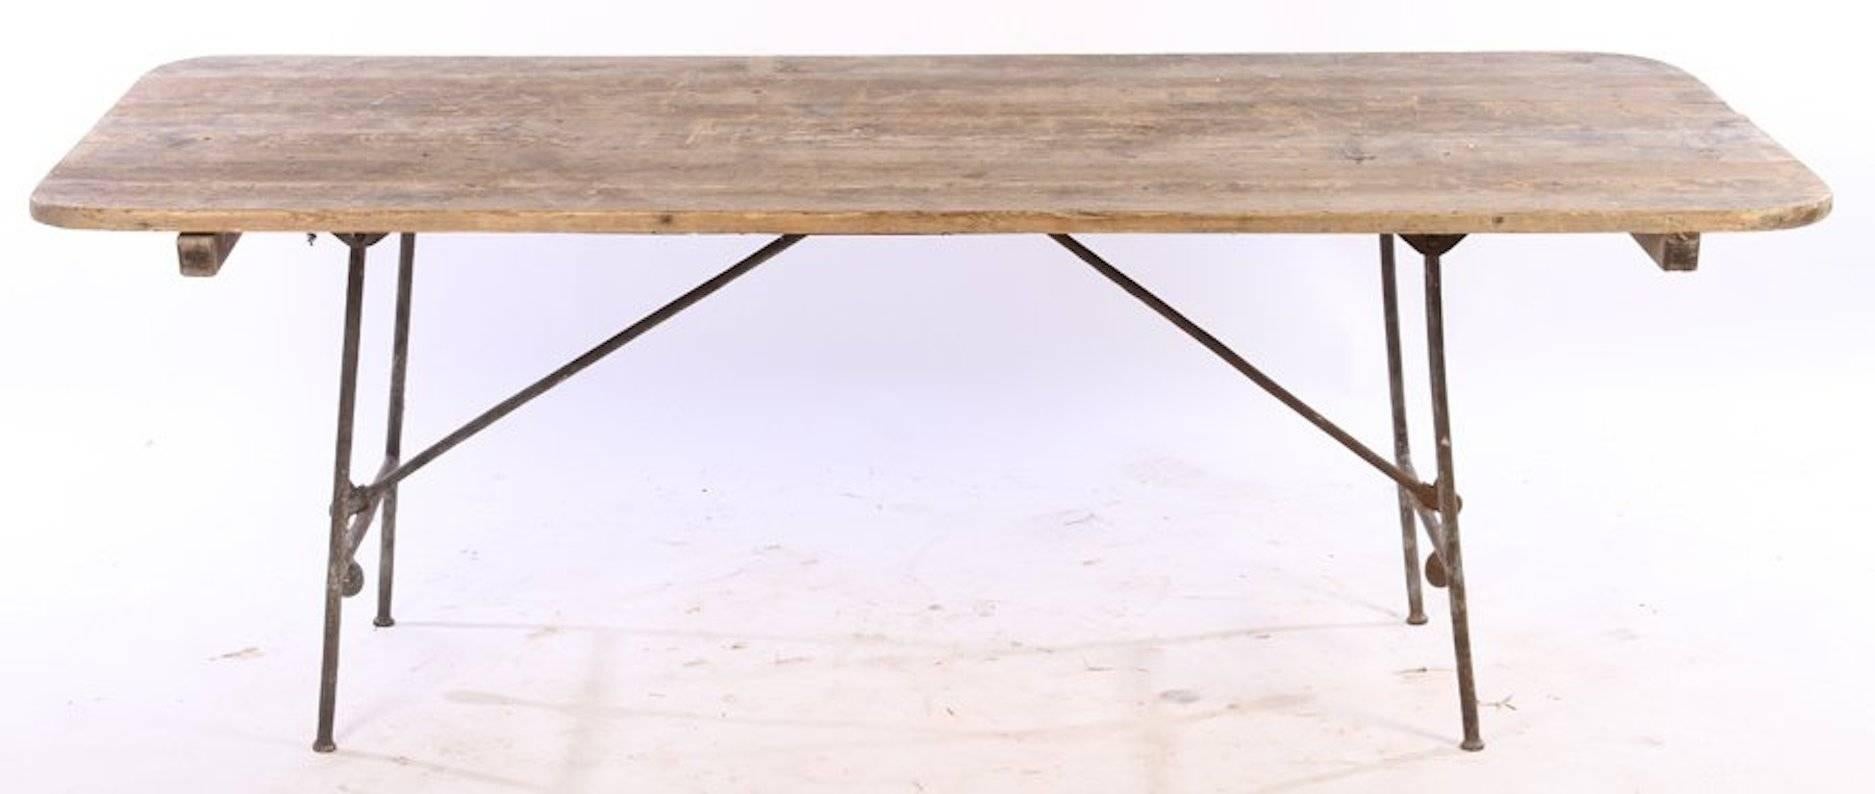 Wood plank tabletop with iron folding legs and counterbalance weights, Continental, early 20th century. 

Dimensions: 28" H x 79" W x 38" D.